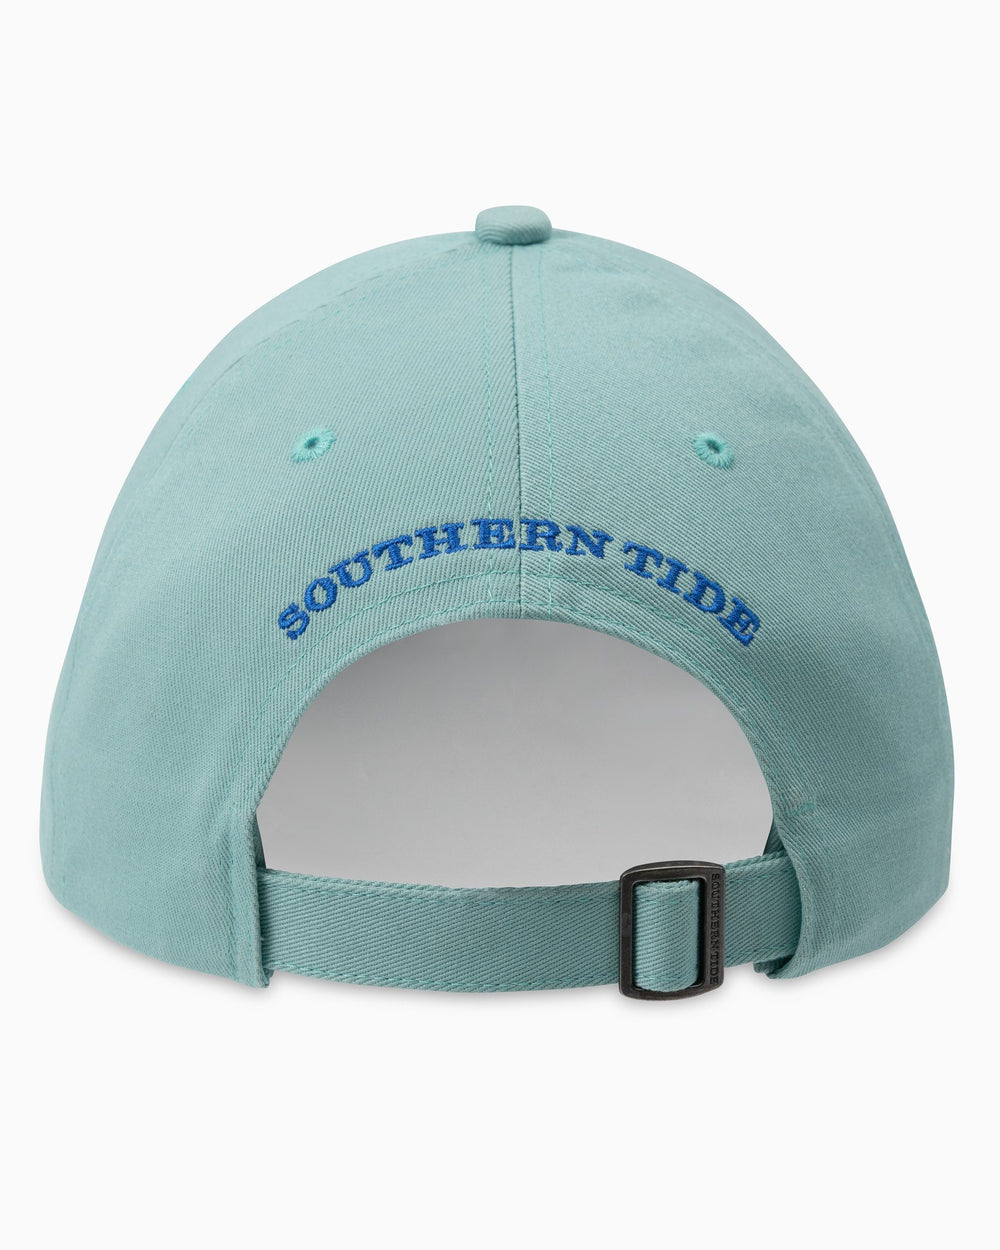 The back of the Skipjack Hat by Southern Tide - Wake Blue